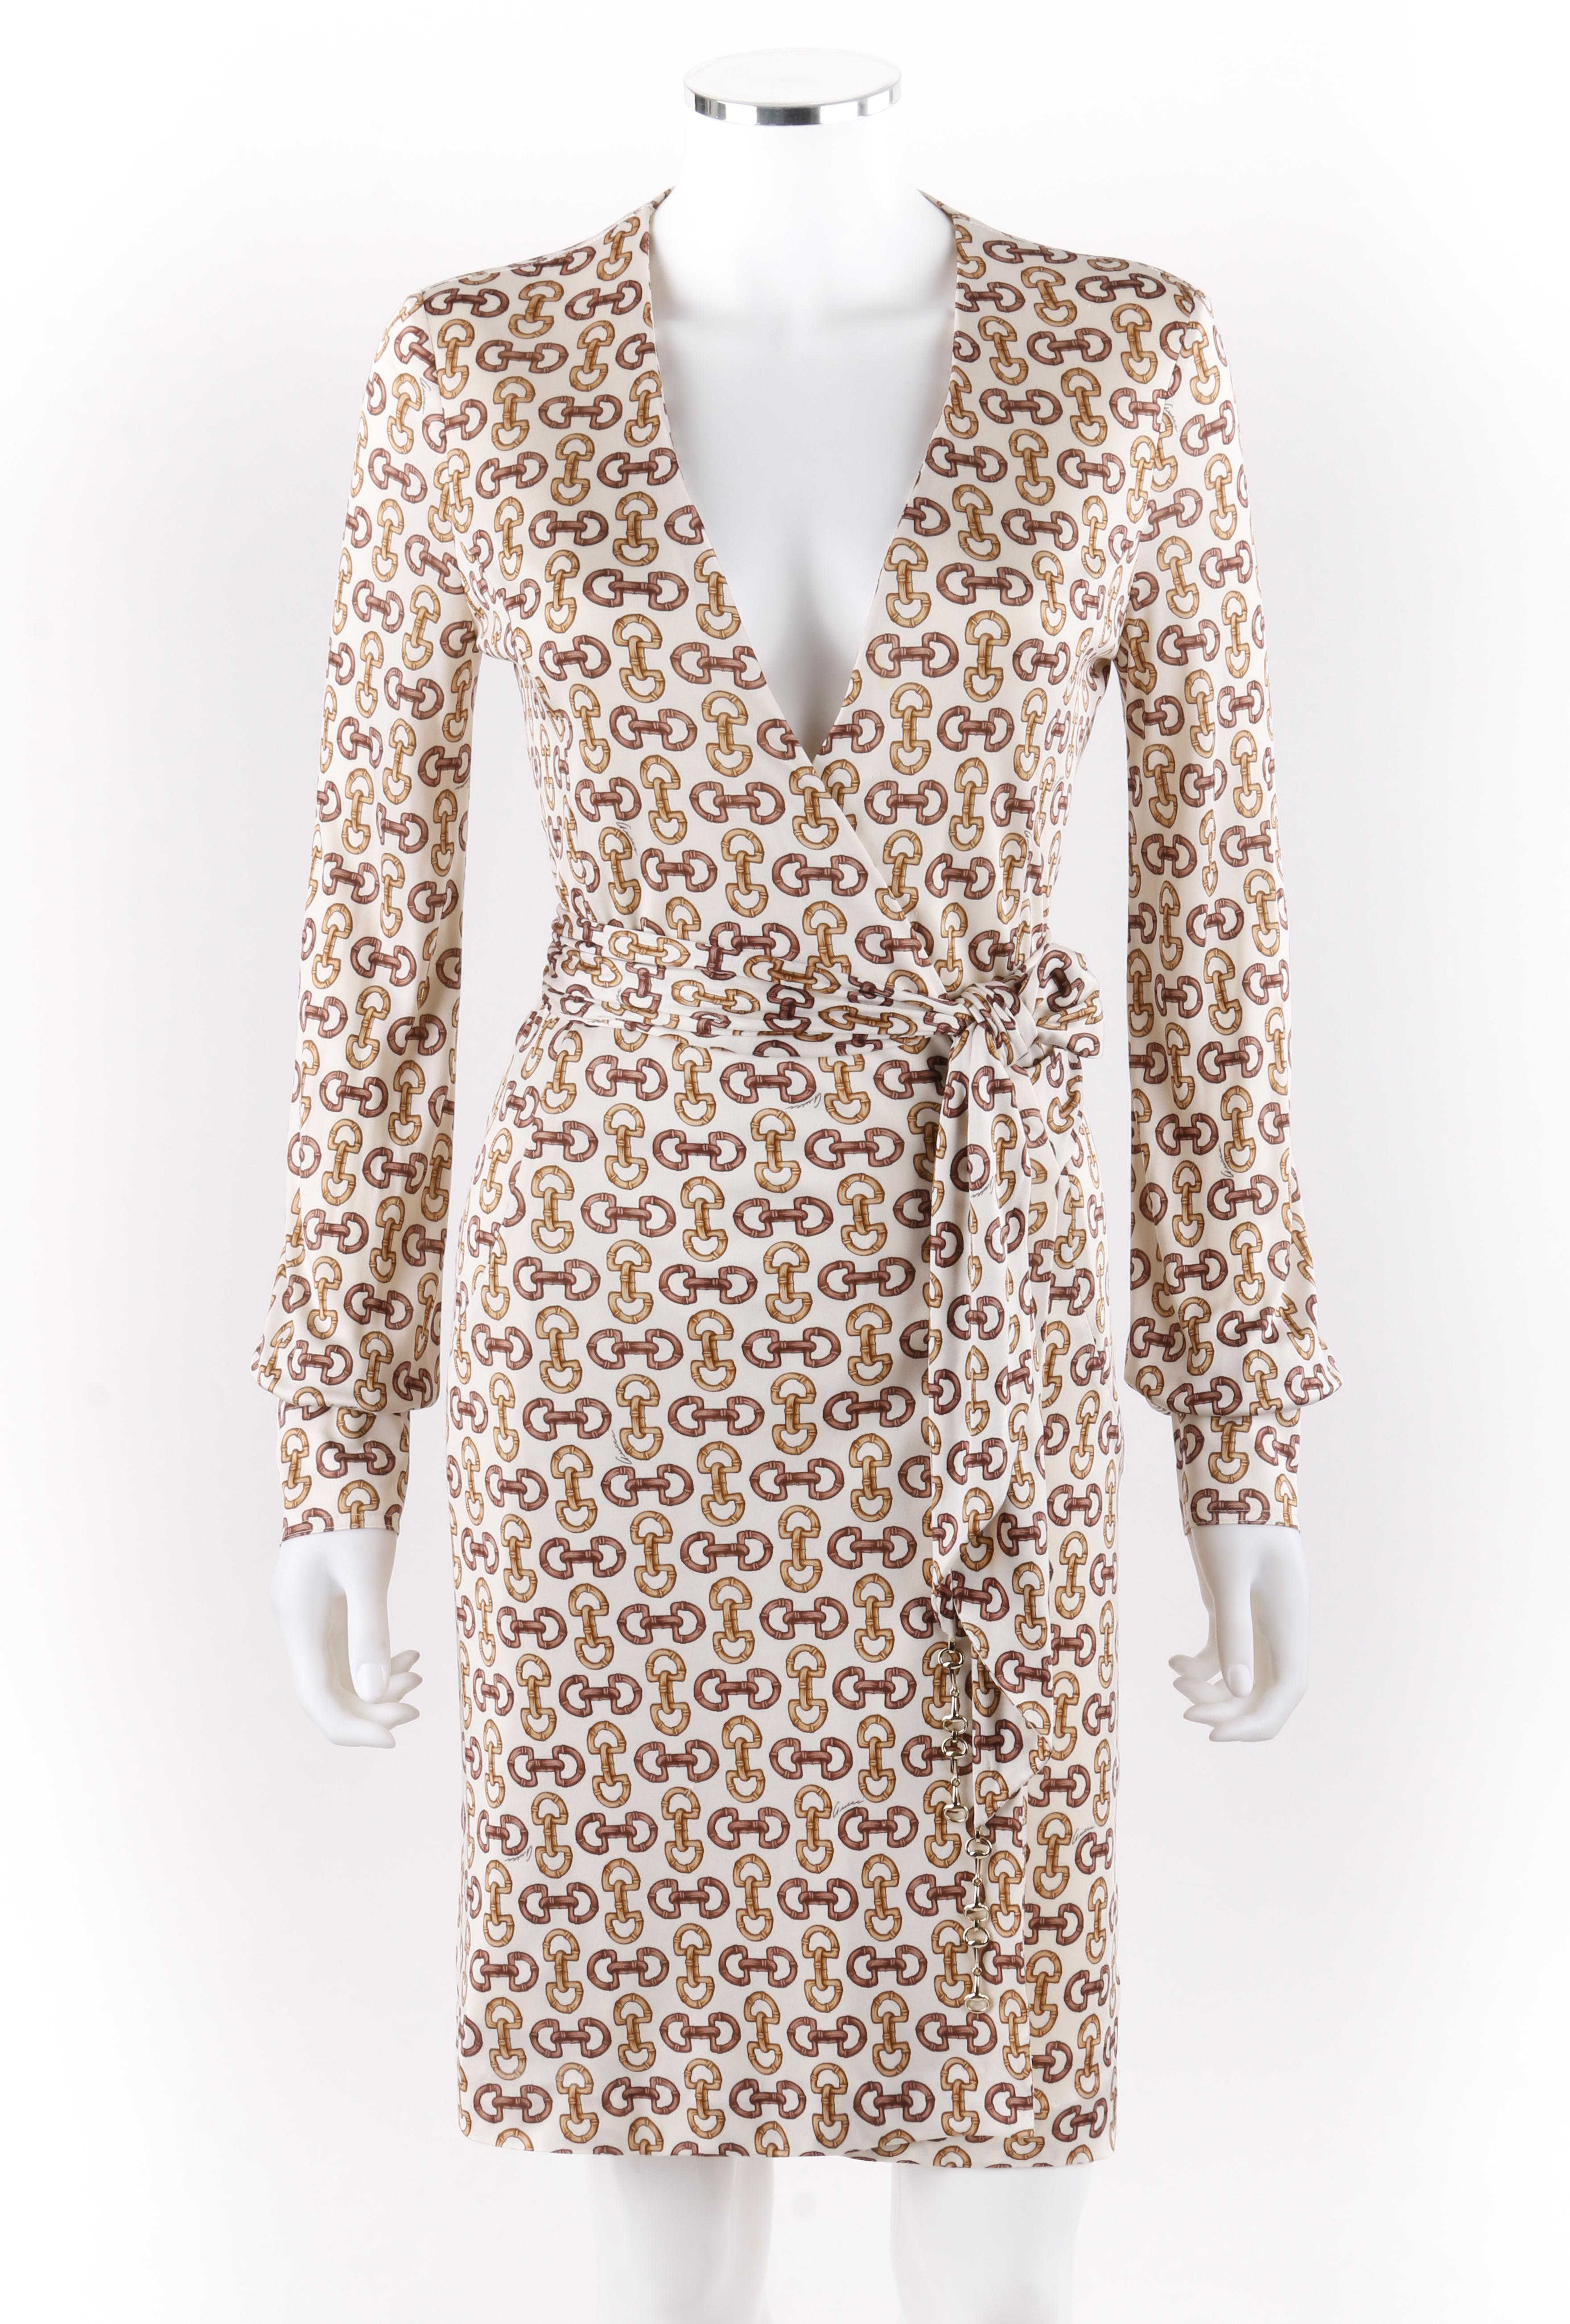 GUCCI A/W 2005 Horsebit Equestrian Bridle Belted Silk Classic Wrap Dress
  
Brand / Manufacturer: Gucci
Collection: Autumn / Winter 2005
Designer: Alessandra Facchinetti
Style: Wrap dress
Color(s): Light beige (exterior, interior), shades of gold,